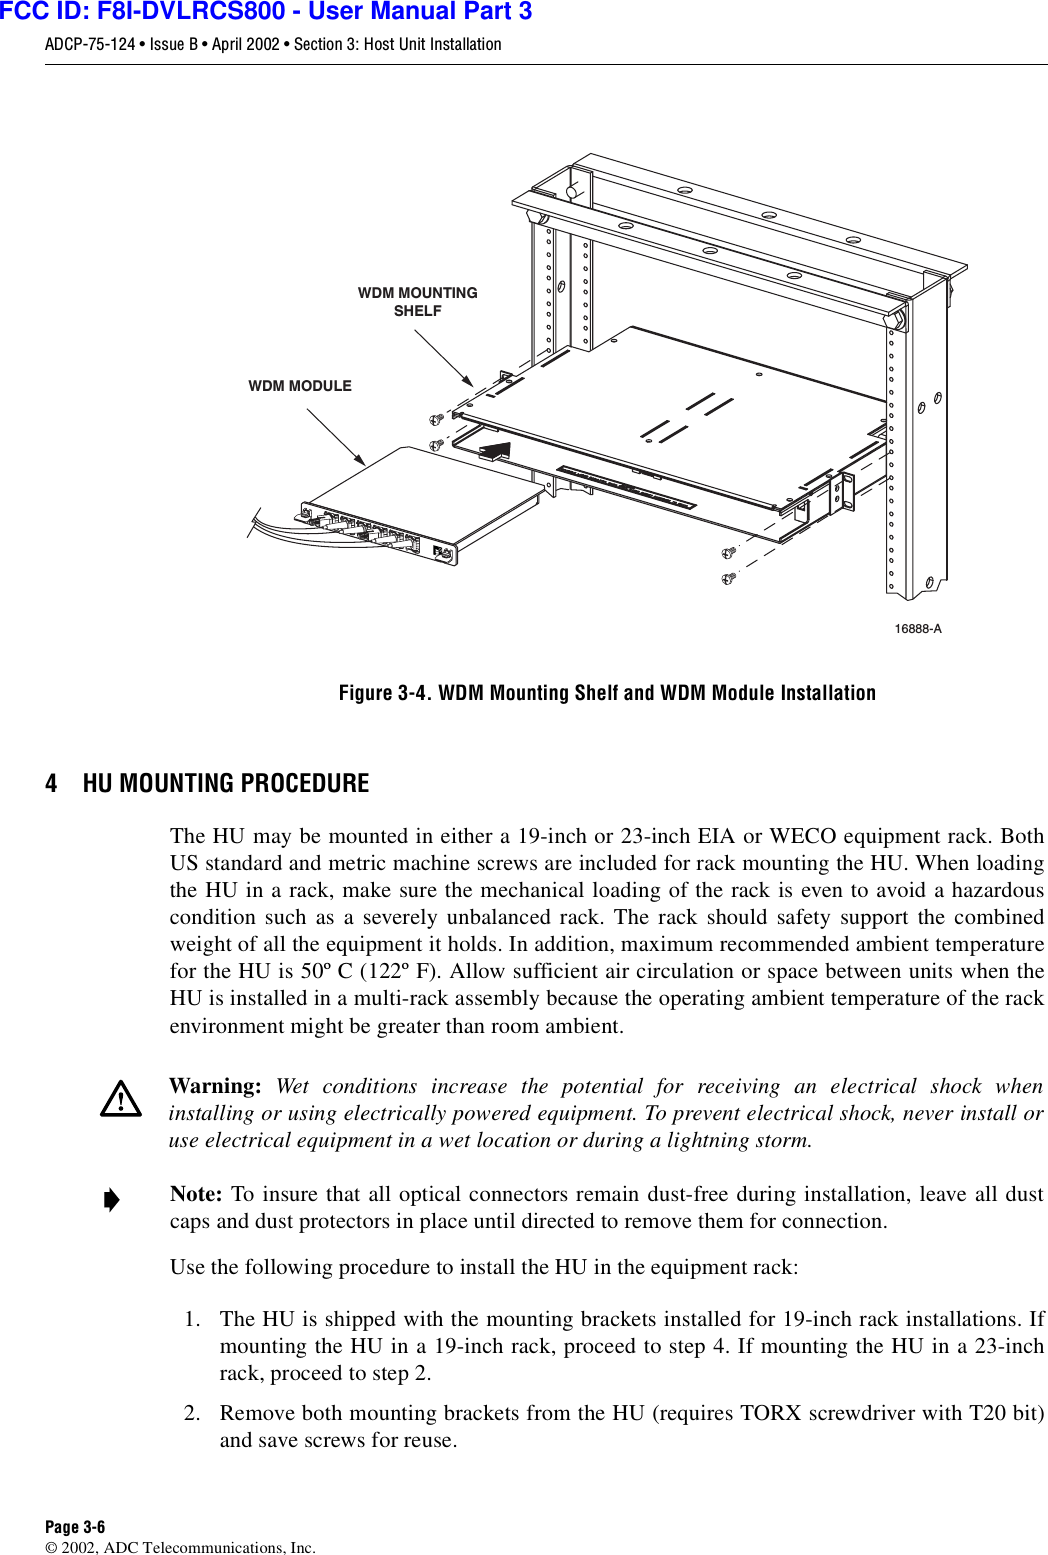 ADCP-75-124 • Issue B • April 2002 • Section 3: Host Unit InstallationPage 3-6©2002, ADC Telecommunications, Inc.Figure 3-4. WDM Mounting Shelf and WDM Module Installation4 HU MOUNTING PROCEDUREThe HU may be mounted in either a19-inch or 23-inch EIA or WECO equipment rack. BothUS standard and metric machine screws are included for rack mounting the HU. When loadingthe HU in arack, make sure the mechanical loading of the rack is even to avoid ahazardouscondition such as aseverely unbalanced rack. The rack should safety support the combinedweight of all the equipment it holds. In addition, maximum recommended ambient temperaturefor the HU is 50º C(122º F). Allow sufficient air circulation or space between units when theHU is installed in amulti-rack assembly because the operating ambient temperature of the rackenvironment might be greater than room ambient.Use the following procedure to install the HU in the equipment rack:1. The HU is shipped with the mounting brackets installed for 19-inch rack installations. Ifmounting the HU in a19-inch rack, proceed to step 4. If mounting the HU in a23-inchrack, proceed to step 2.2. Remove both mounting brackets from the HU (requires TORX screwdriver with T20 bit)and save screws for reuse.Warning: Wet conditions increase the potential for receiving an electrical shock wheninstalling or using electrically powered equipment. To prevent electrical shock, never install oruse electrical equipment in awet location or during alightning storm.Note: To insure that all optical connectors remain dust-free during installation, leave all dustcaps and dust protectors in place until directed to remove them for connection.16888-A WDM MODULEWDM MOUNTINGSHELFFCC ID: F8I-DVLRCS800 - User Manual Part 3